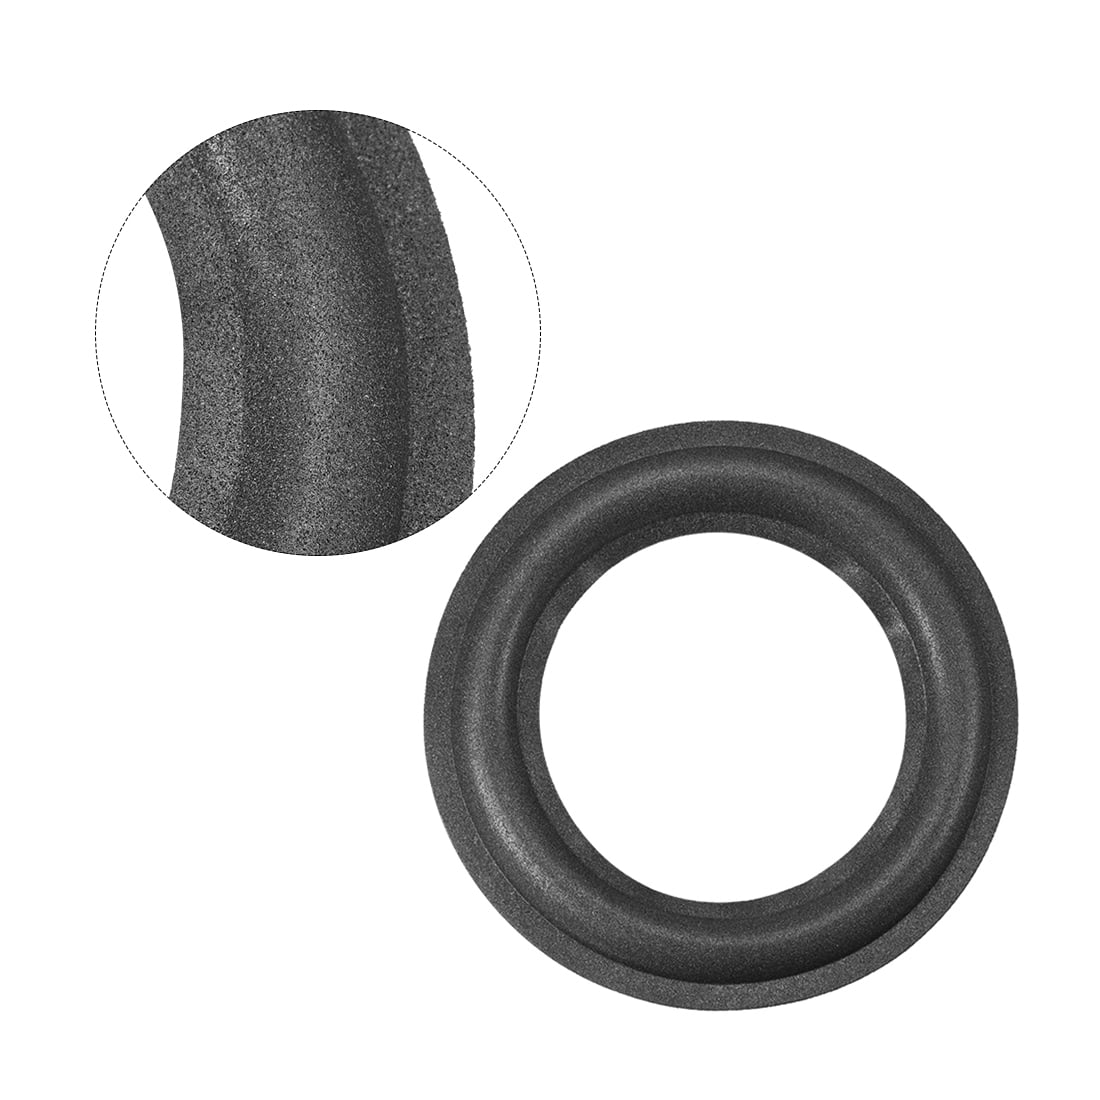 uxcell 4.5 inches 4.5 inch Speaker Foam Edge Surround Rings Replacement Parts for Speaker Repair or DIY 2pcs